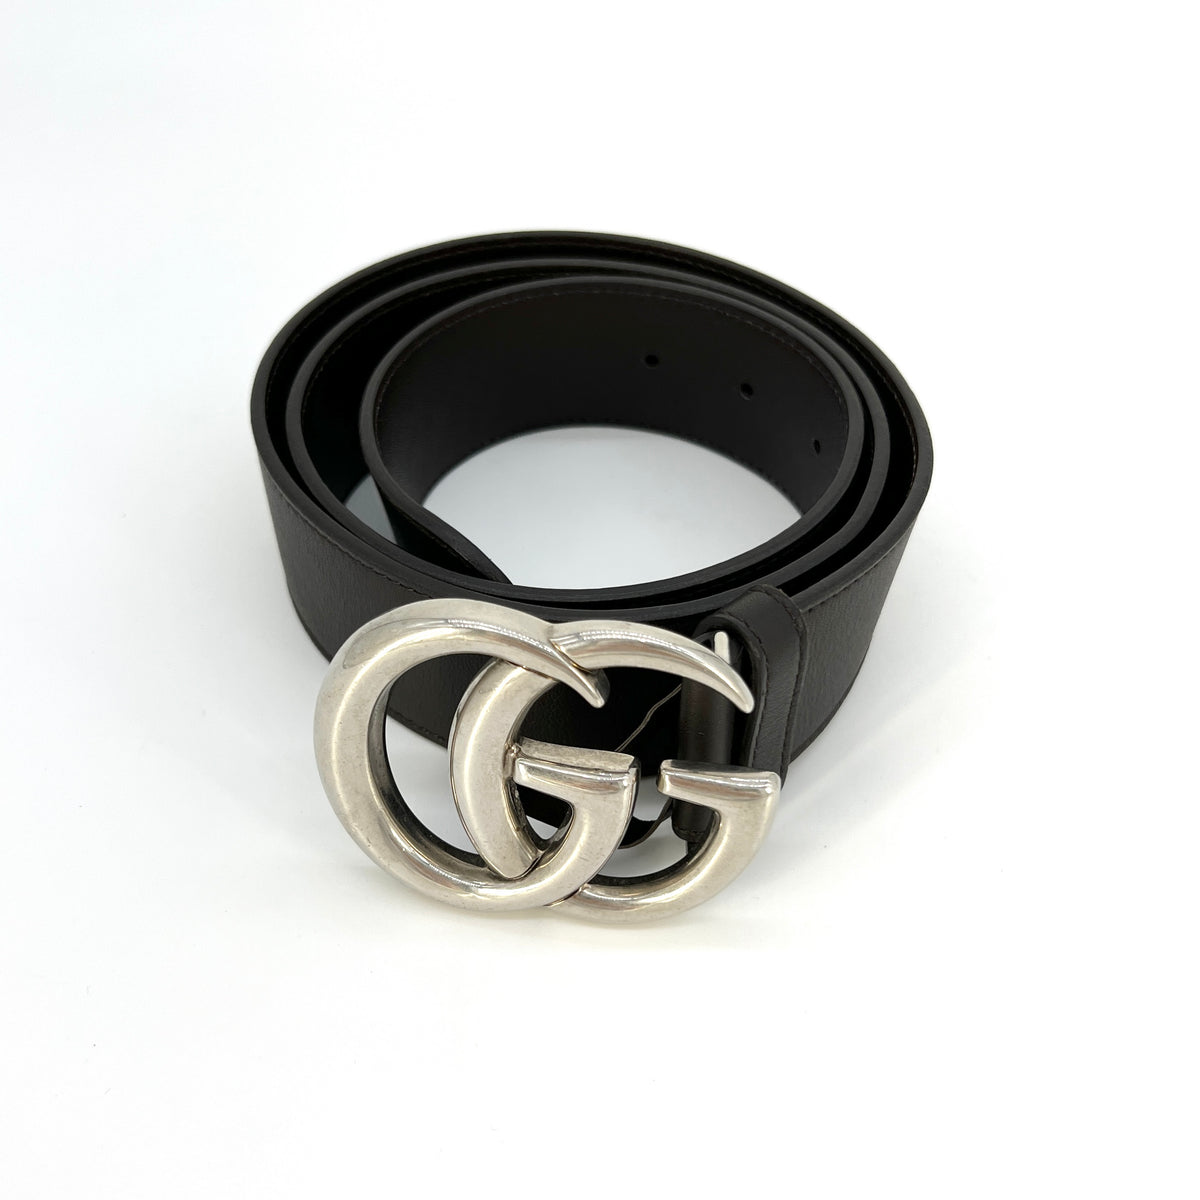 Gucci Calfskin Double G 40mm Belt 90 36 Black [Guaranteed Authentic]